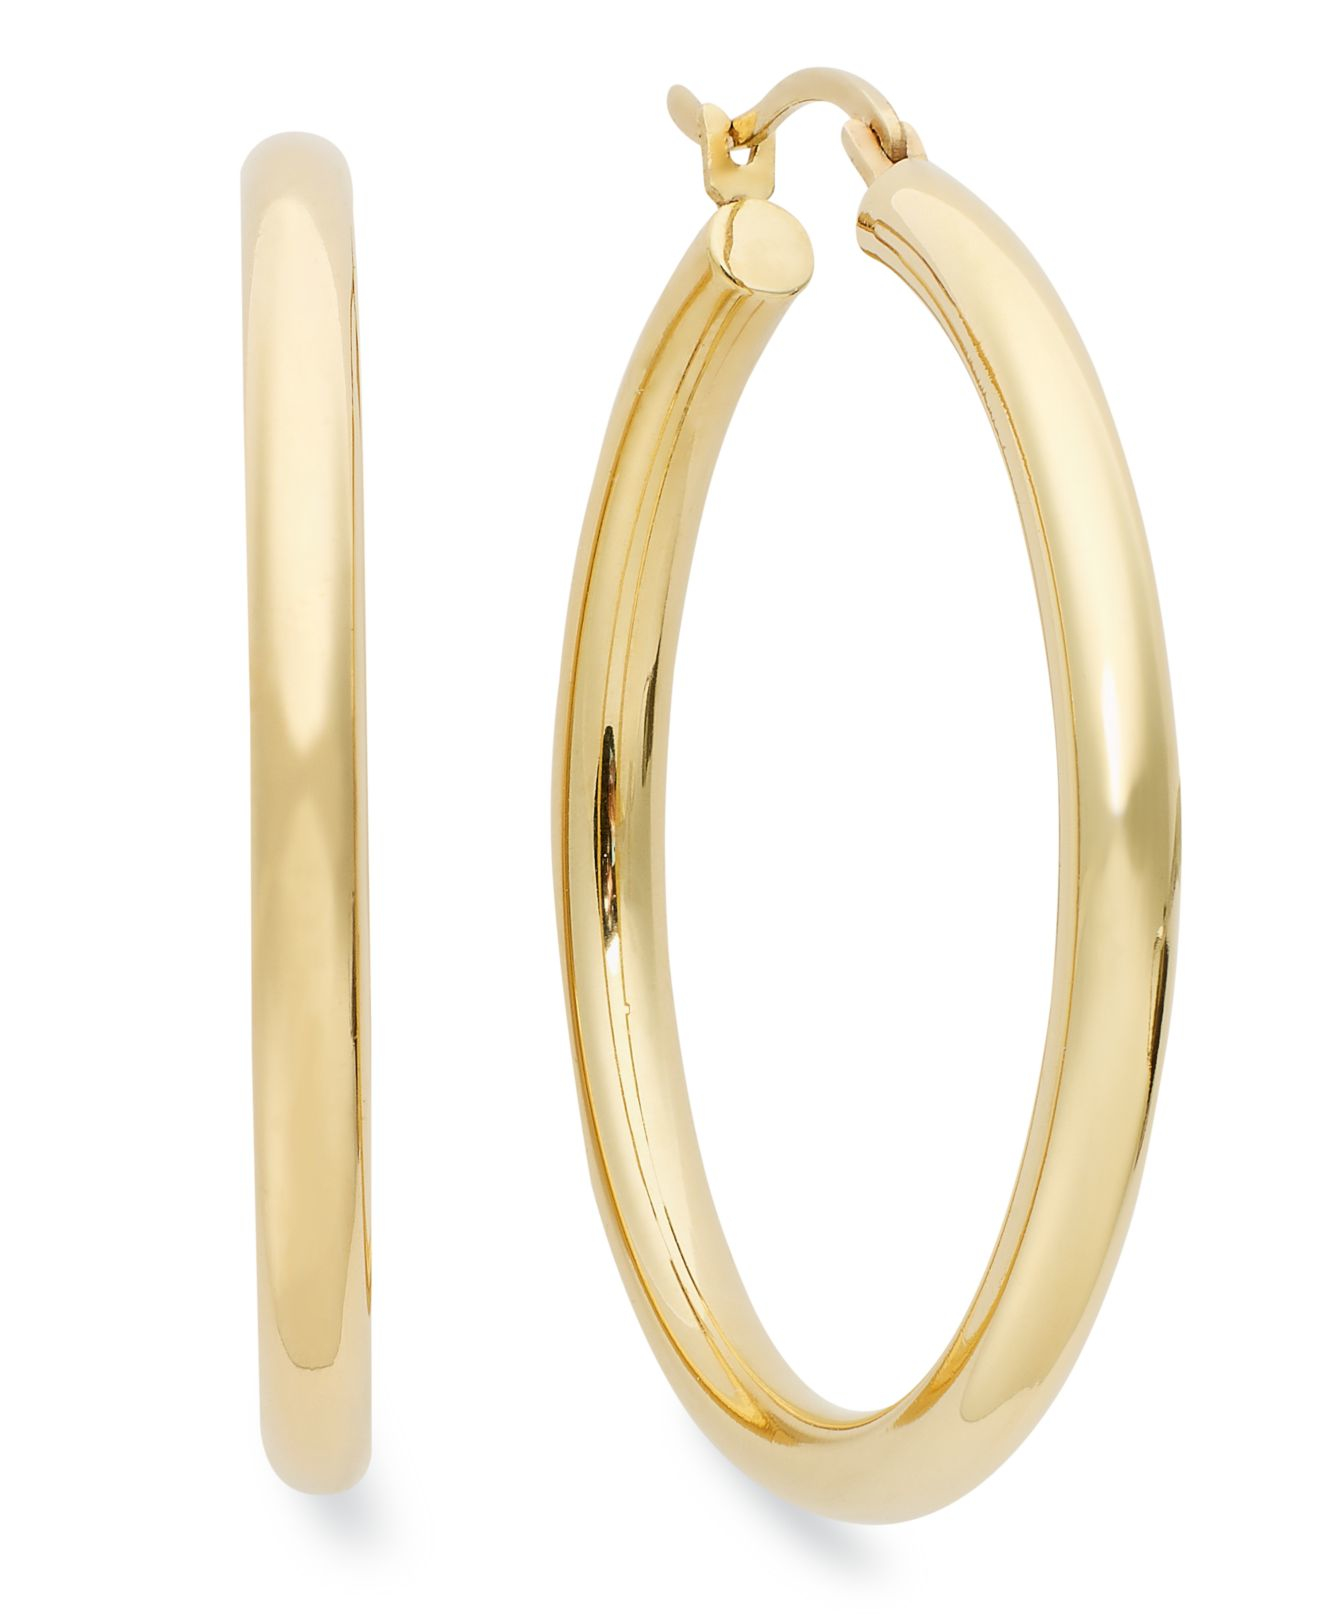 Lyst - Signature gold Polished Hoop Earrings In 14k Gold in Metallic - Save 10%